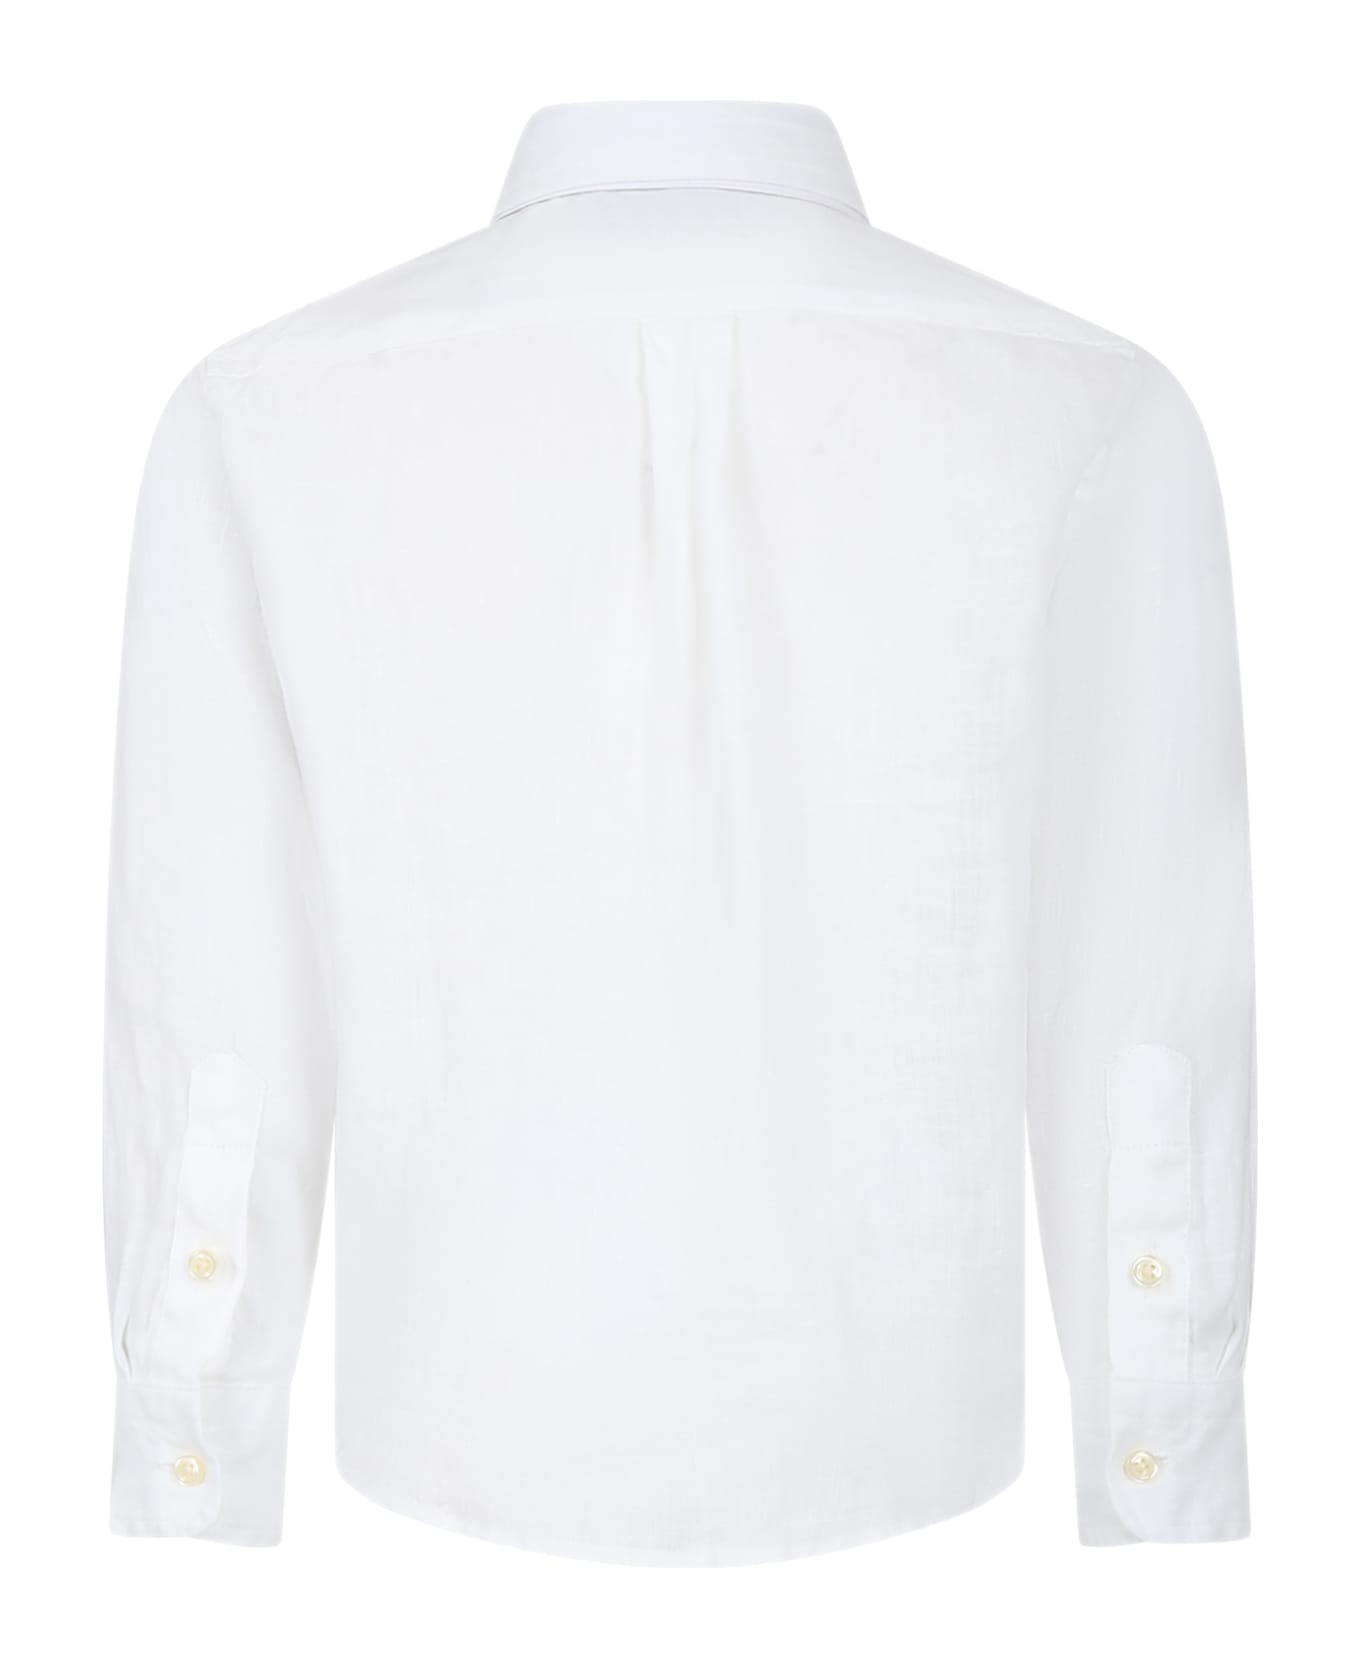 Ralph Lauren White Shirt For Boy With Pony - White